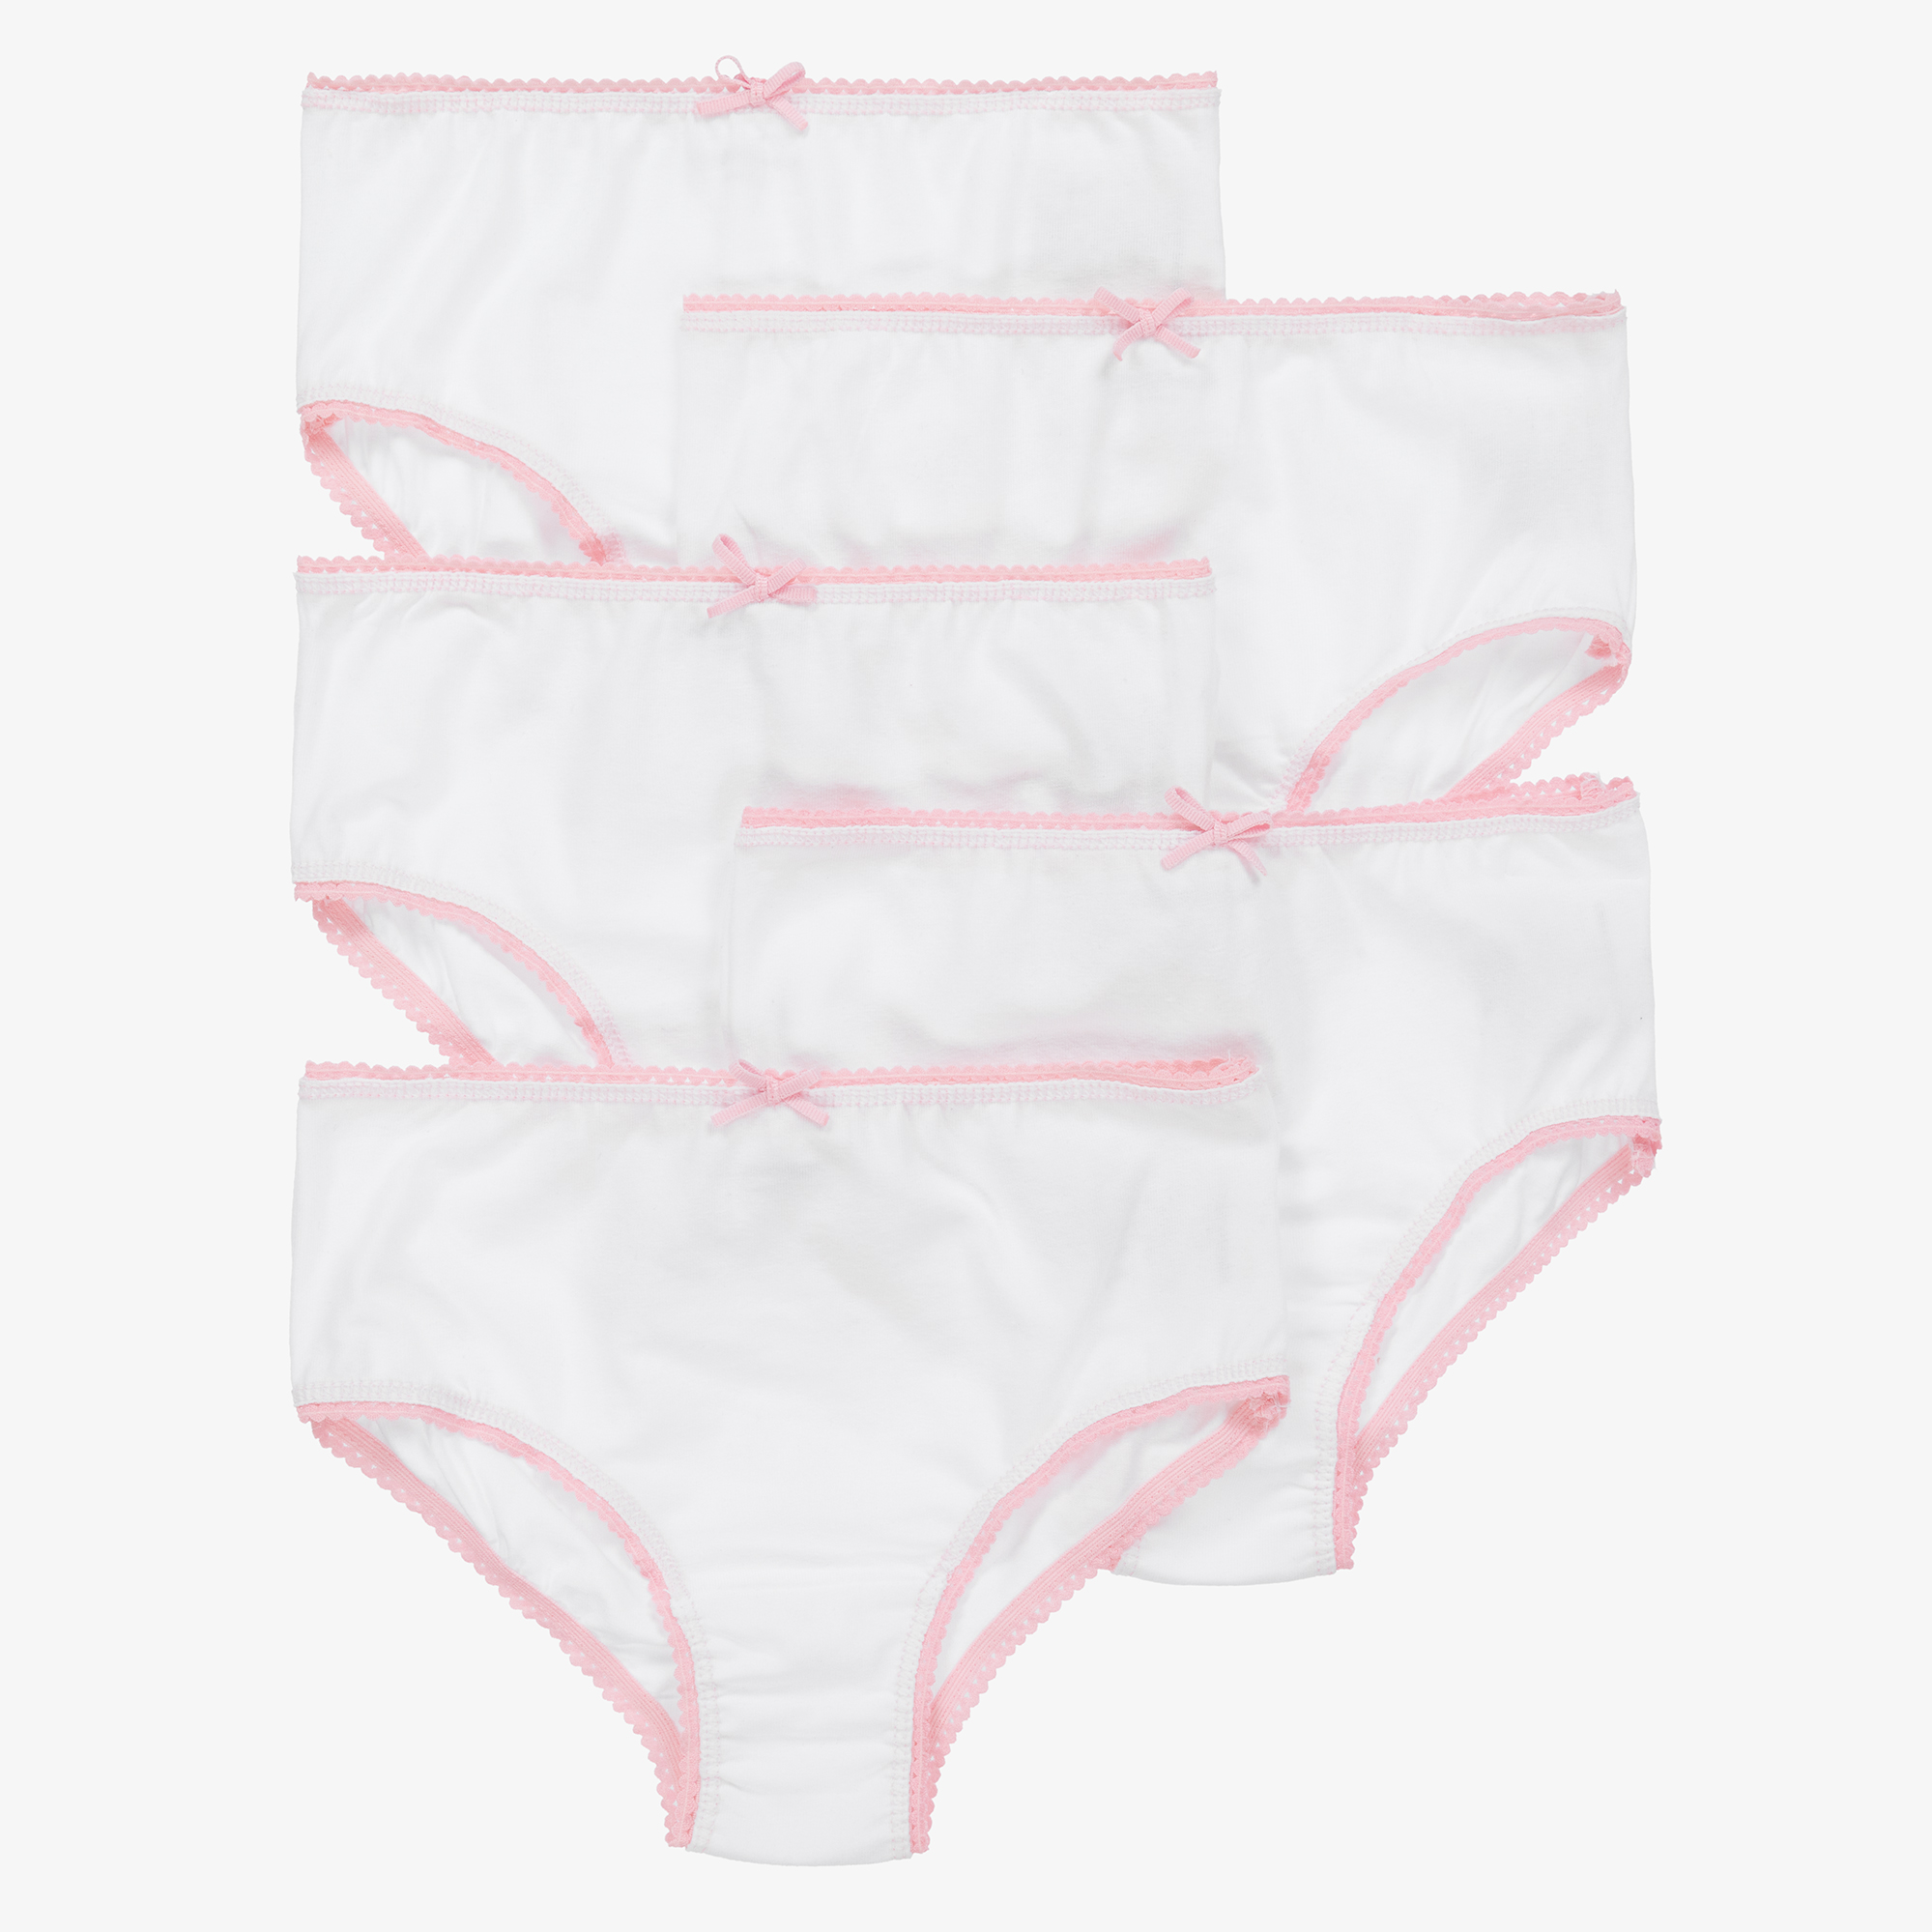 BNWT New Tesco Pack 3 White + Pink FRILLY KNICKERS 18-24 months 92cm